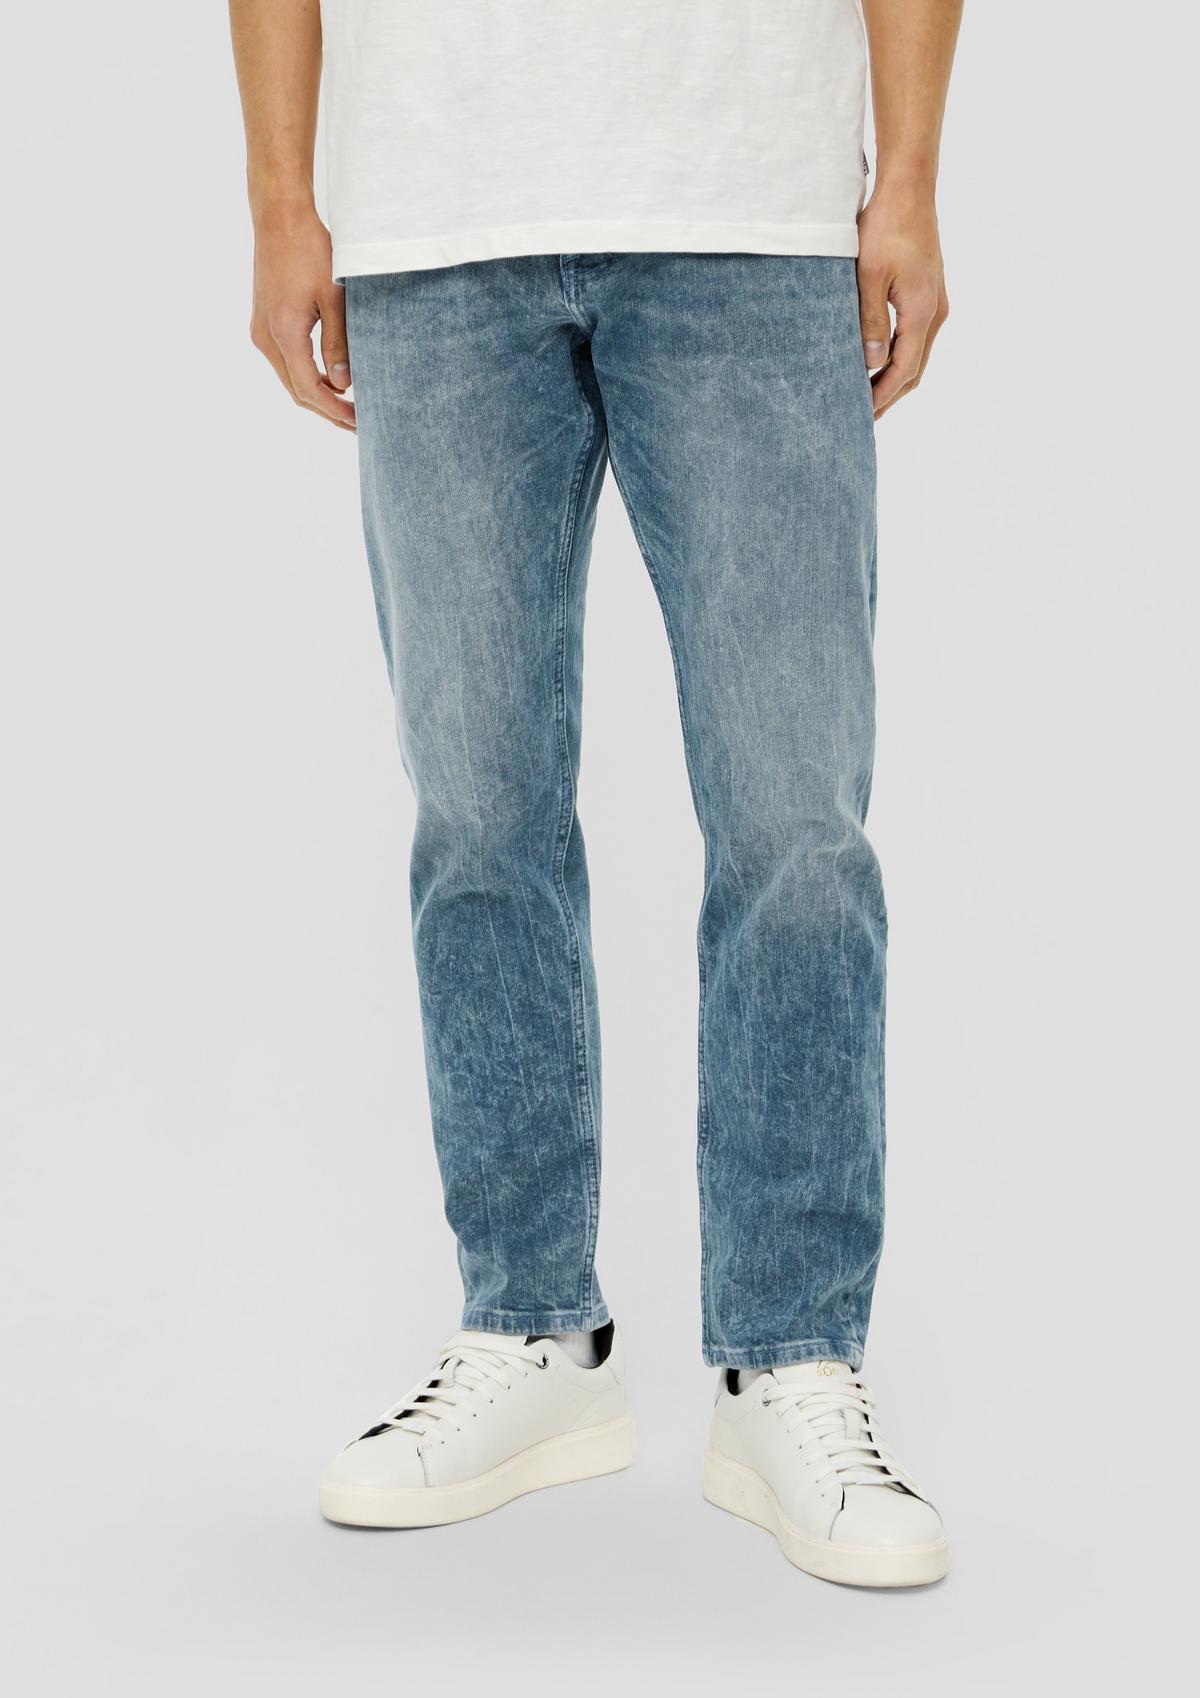 s.Oliver Jeans Mauro / Regular Fit / High Rise / Tapered Leg